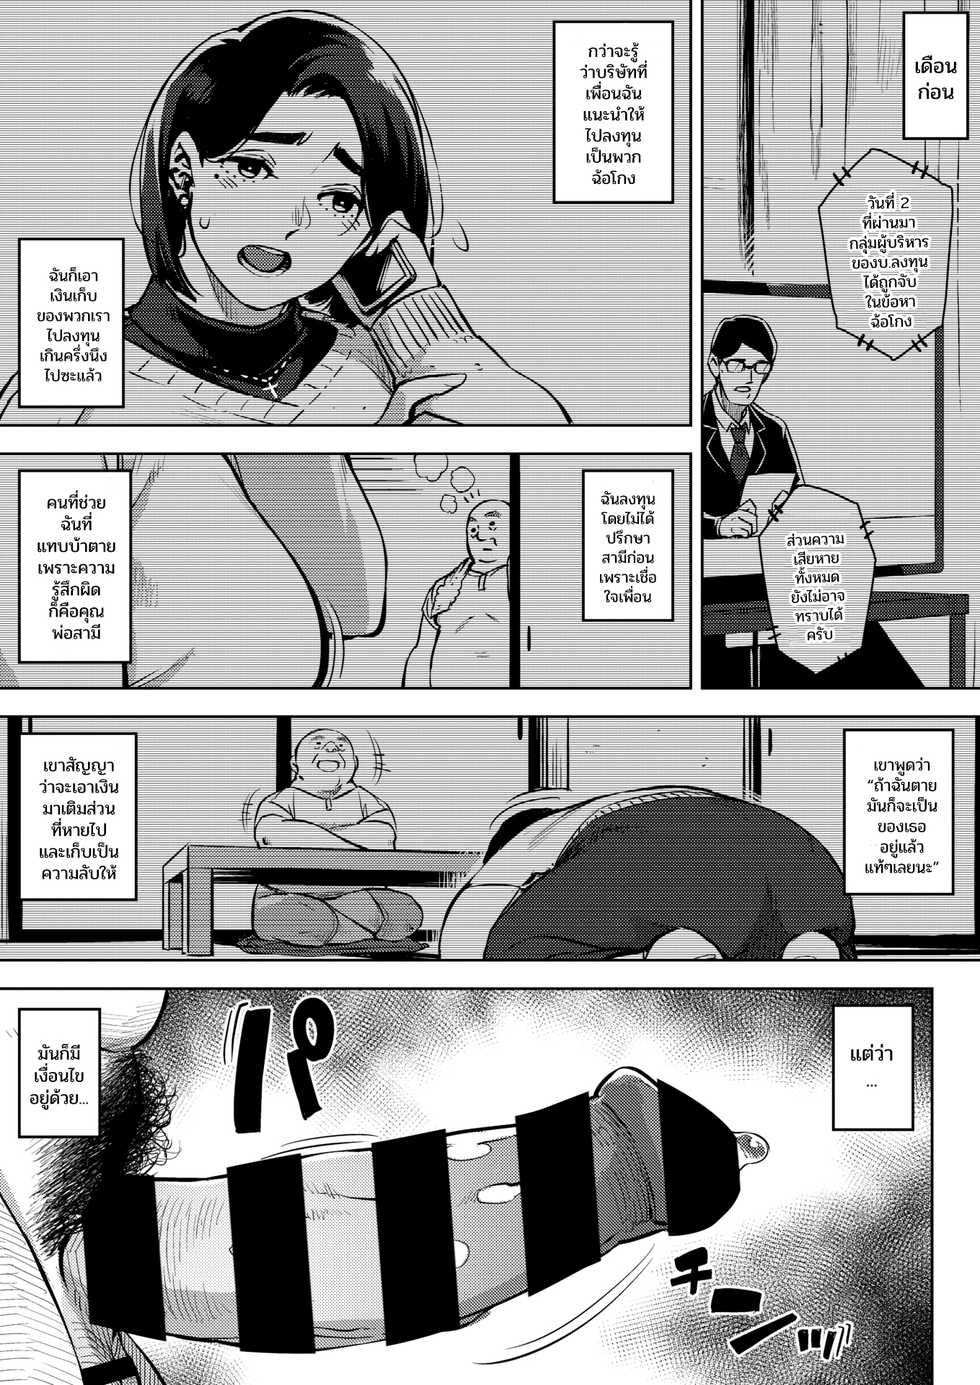 [Rocket Monkey] Gifu to... Zenpen | With My Father-in-Law... First Part (COMIC HOTMiLK Koime Vol. 27) [Thai ภาษาไทย] [chingchon] [Digital] - Page 11